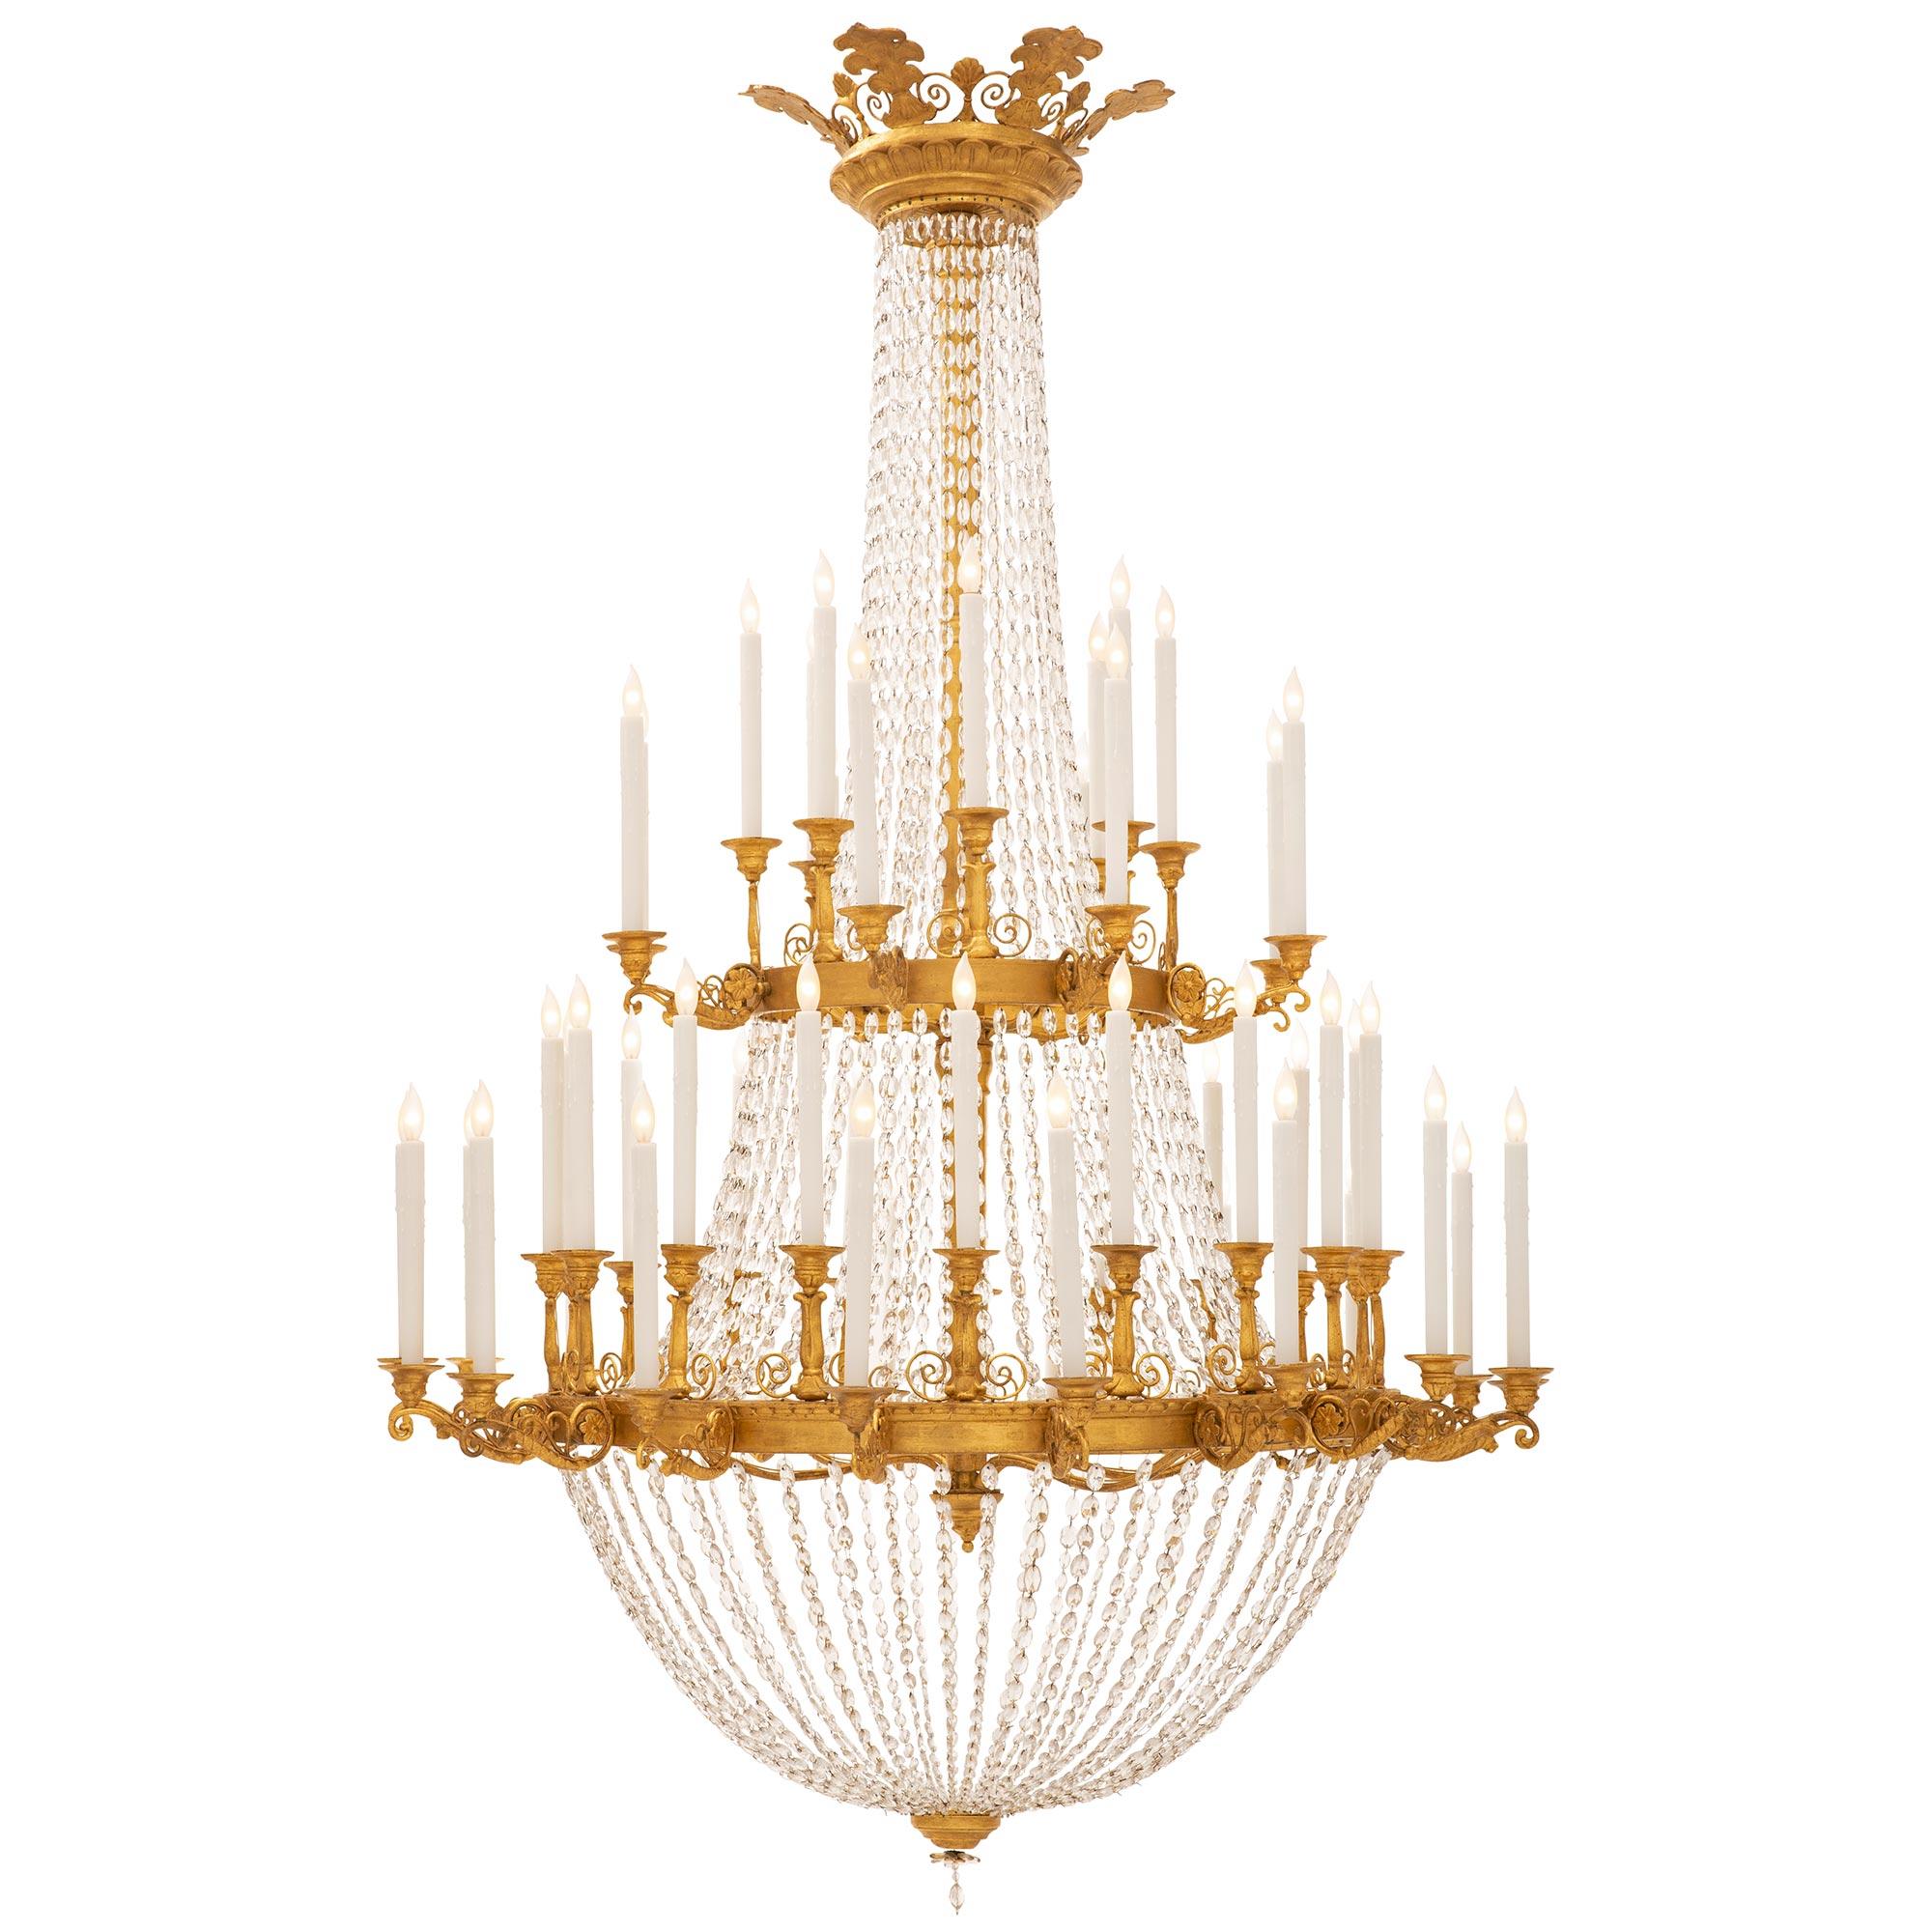 Neoclassical An Italian 18th century Neo-Classical st. giltwood and crystal chandelier For Sale